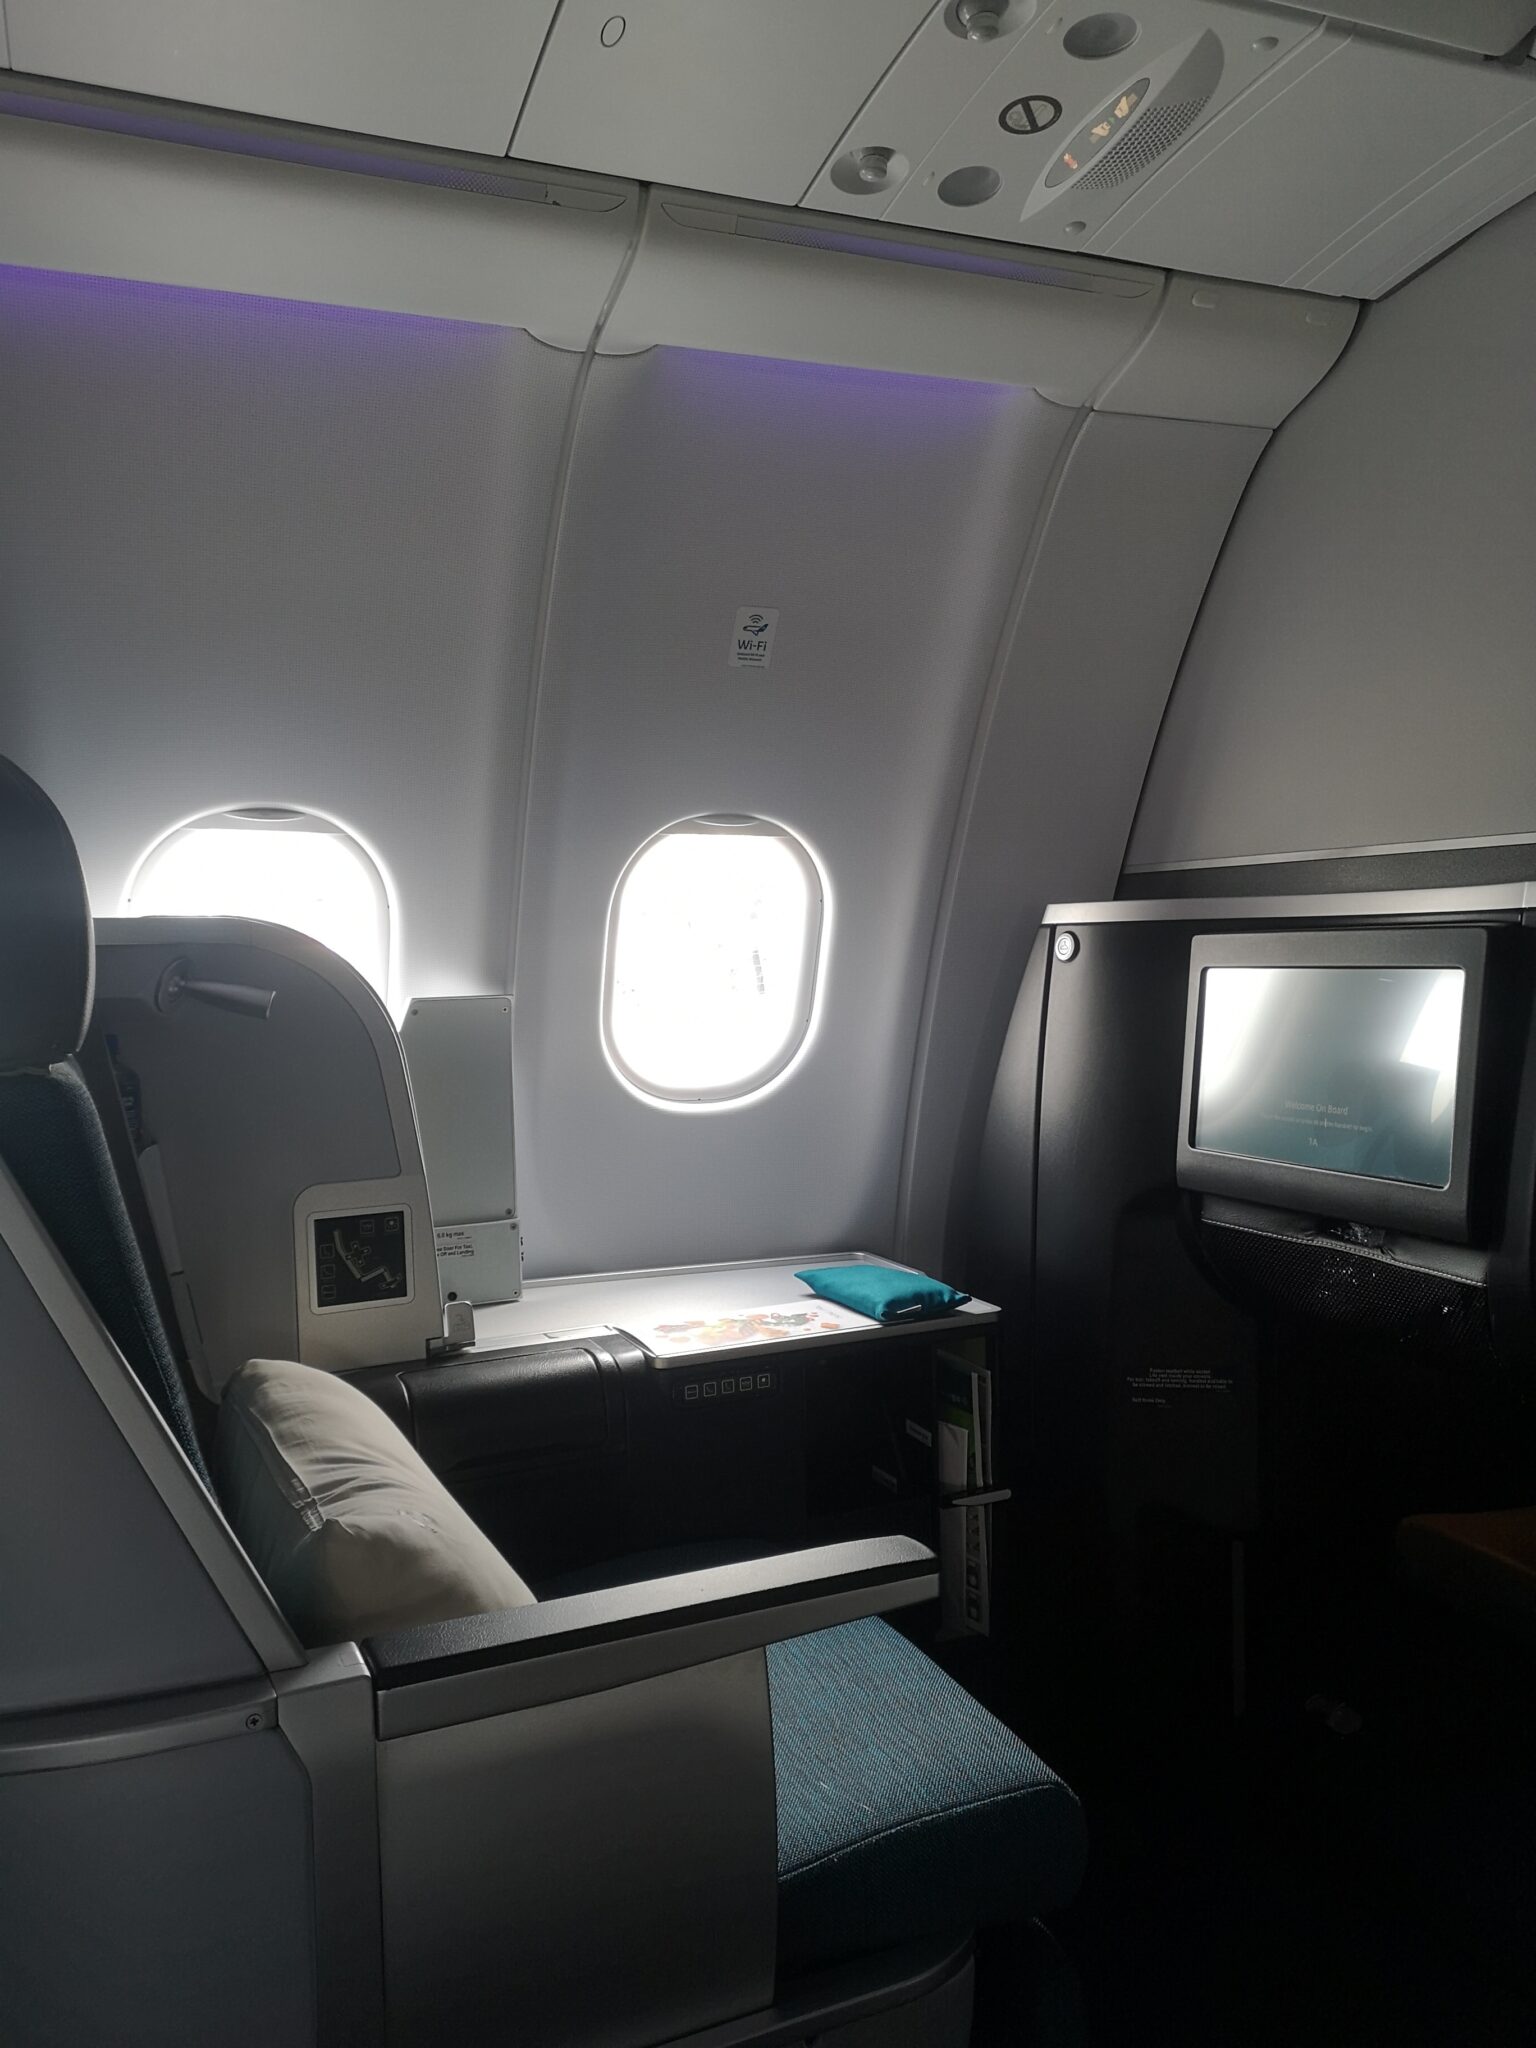 Business Class seat in Aer Lingus.